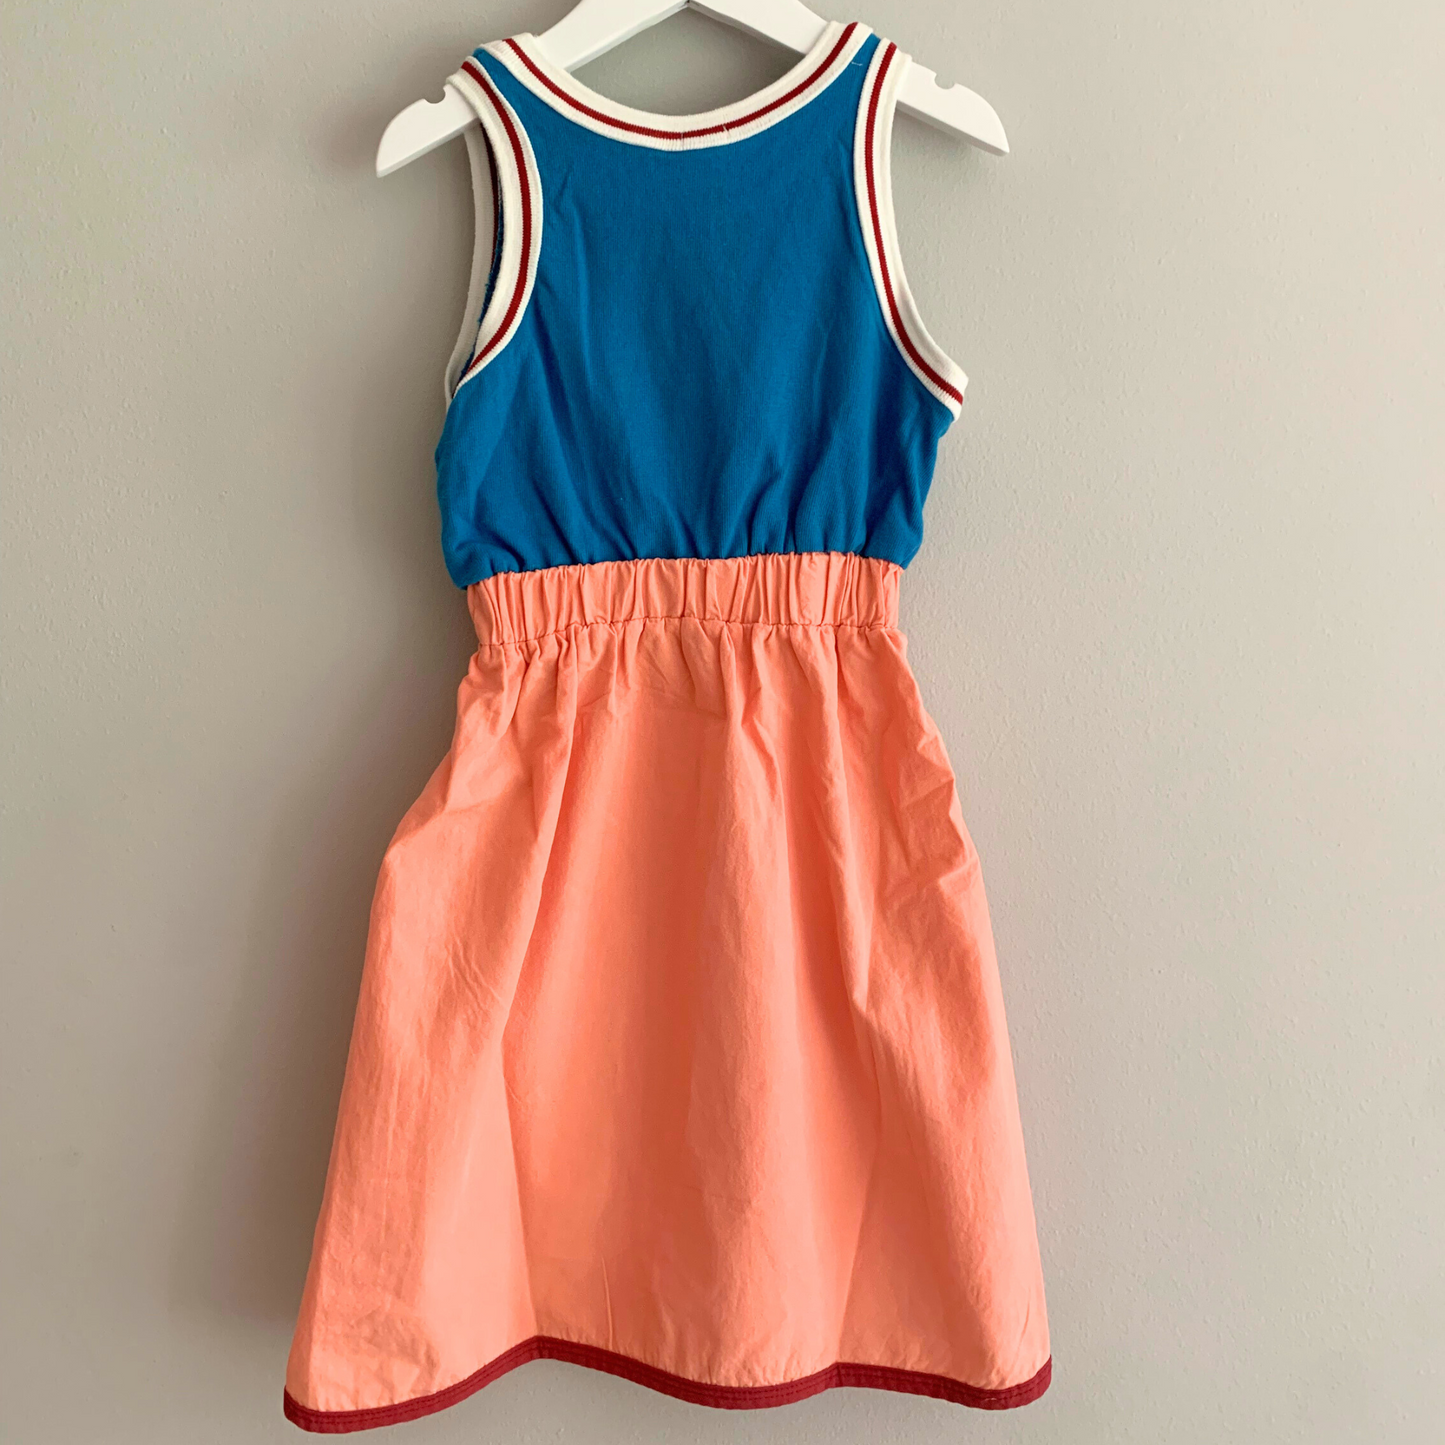 Blue Bolt Summer Dress (New with Tags) - Size 2T